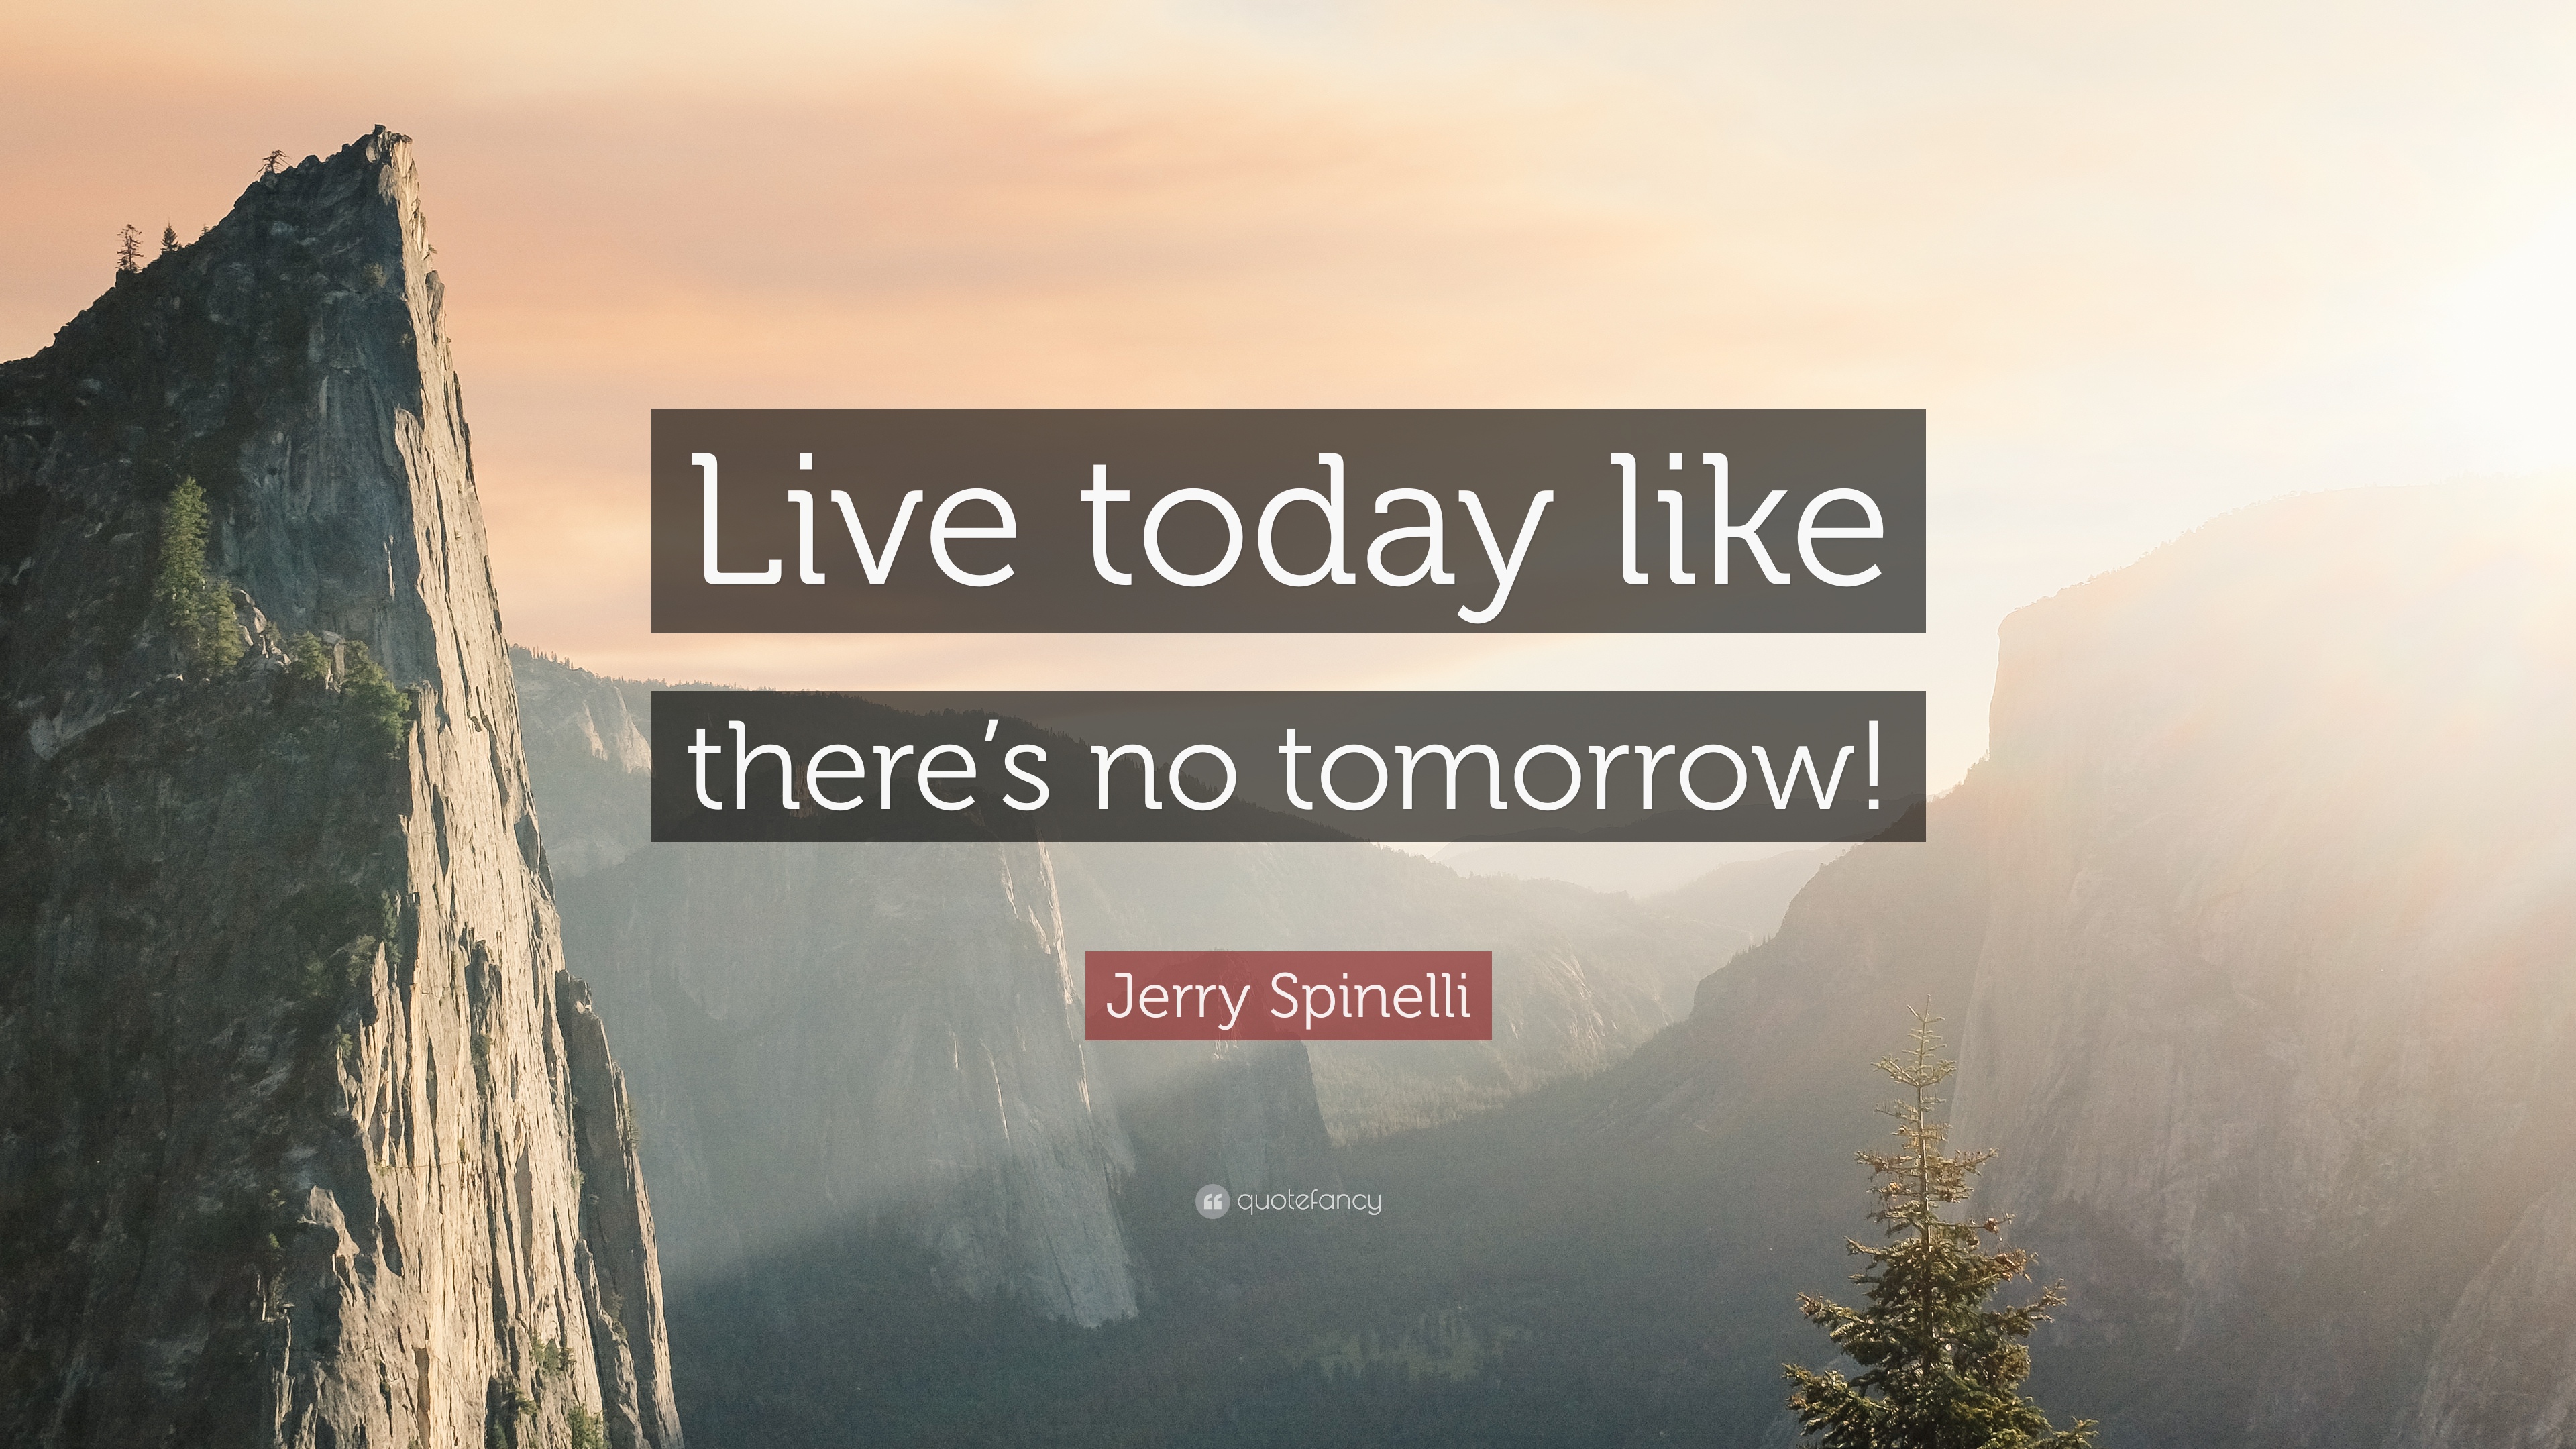 Jerry Spinelli Quote: “Live today like there's no tomorrow!”